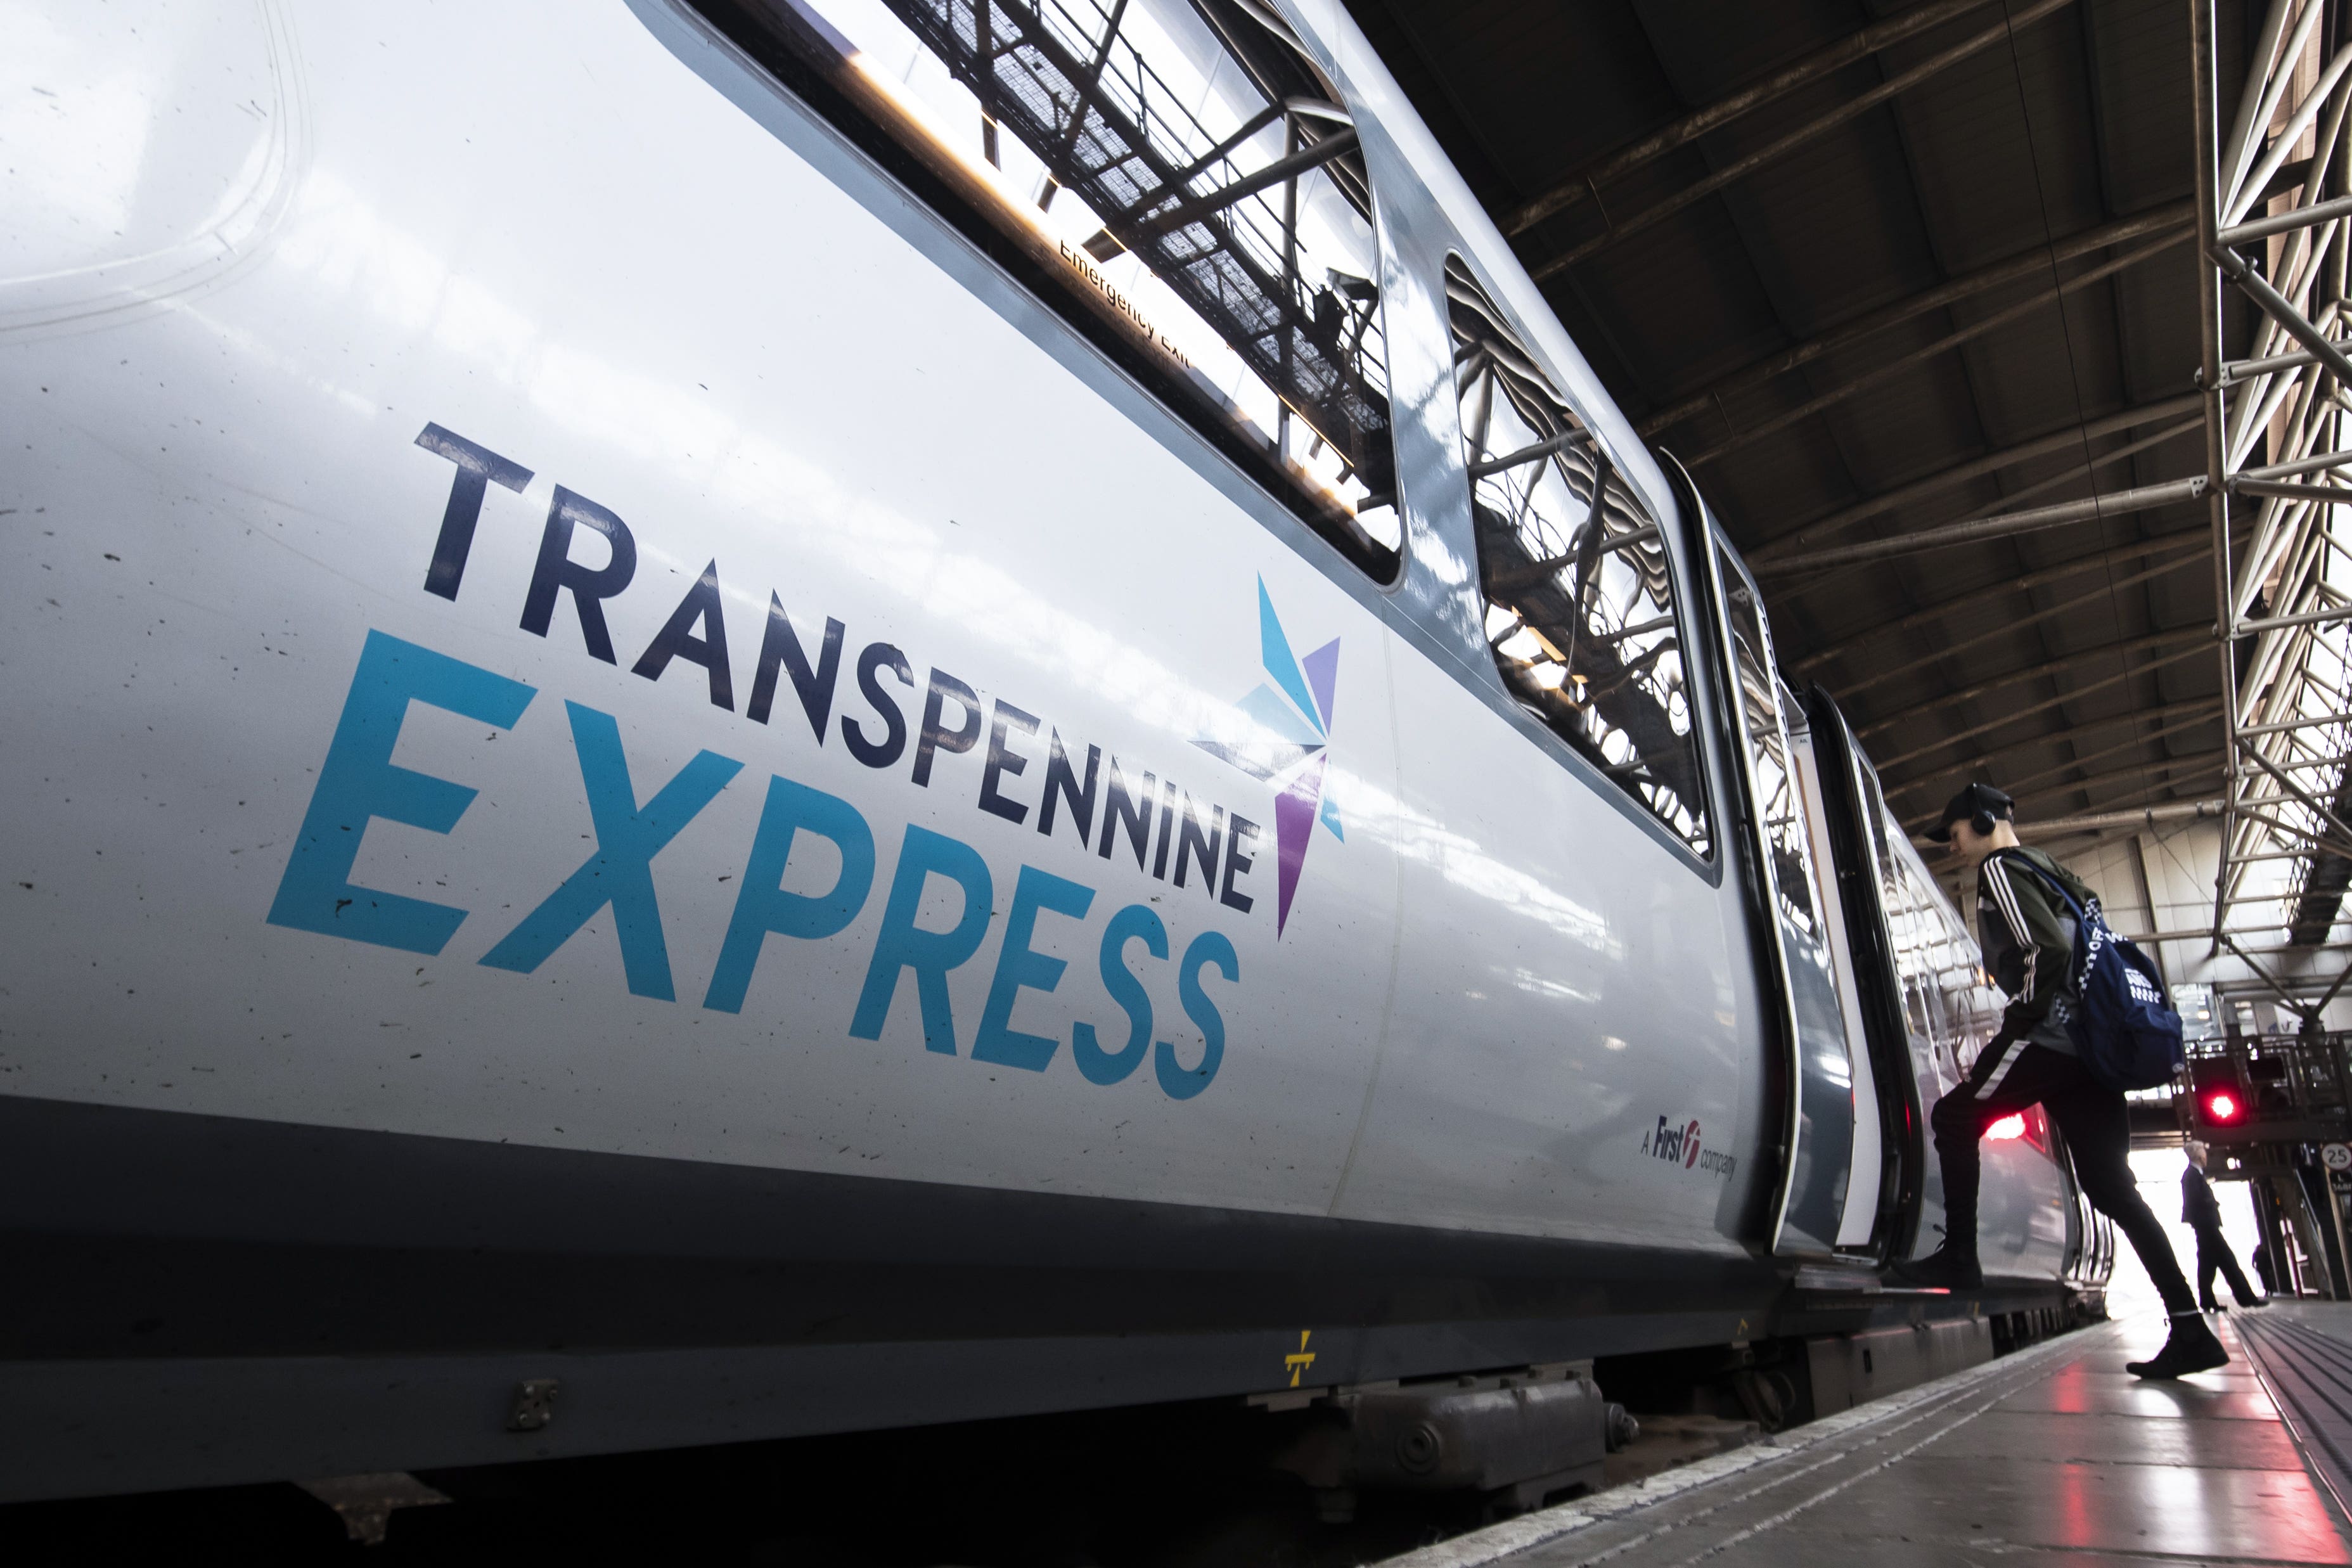 Transport Secretary Mark Harper said ‘no option is off the table’ ahead of his decision on whether to renew the contract of train company TransPennine Express (Danny Lawson/PA)